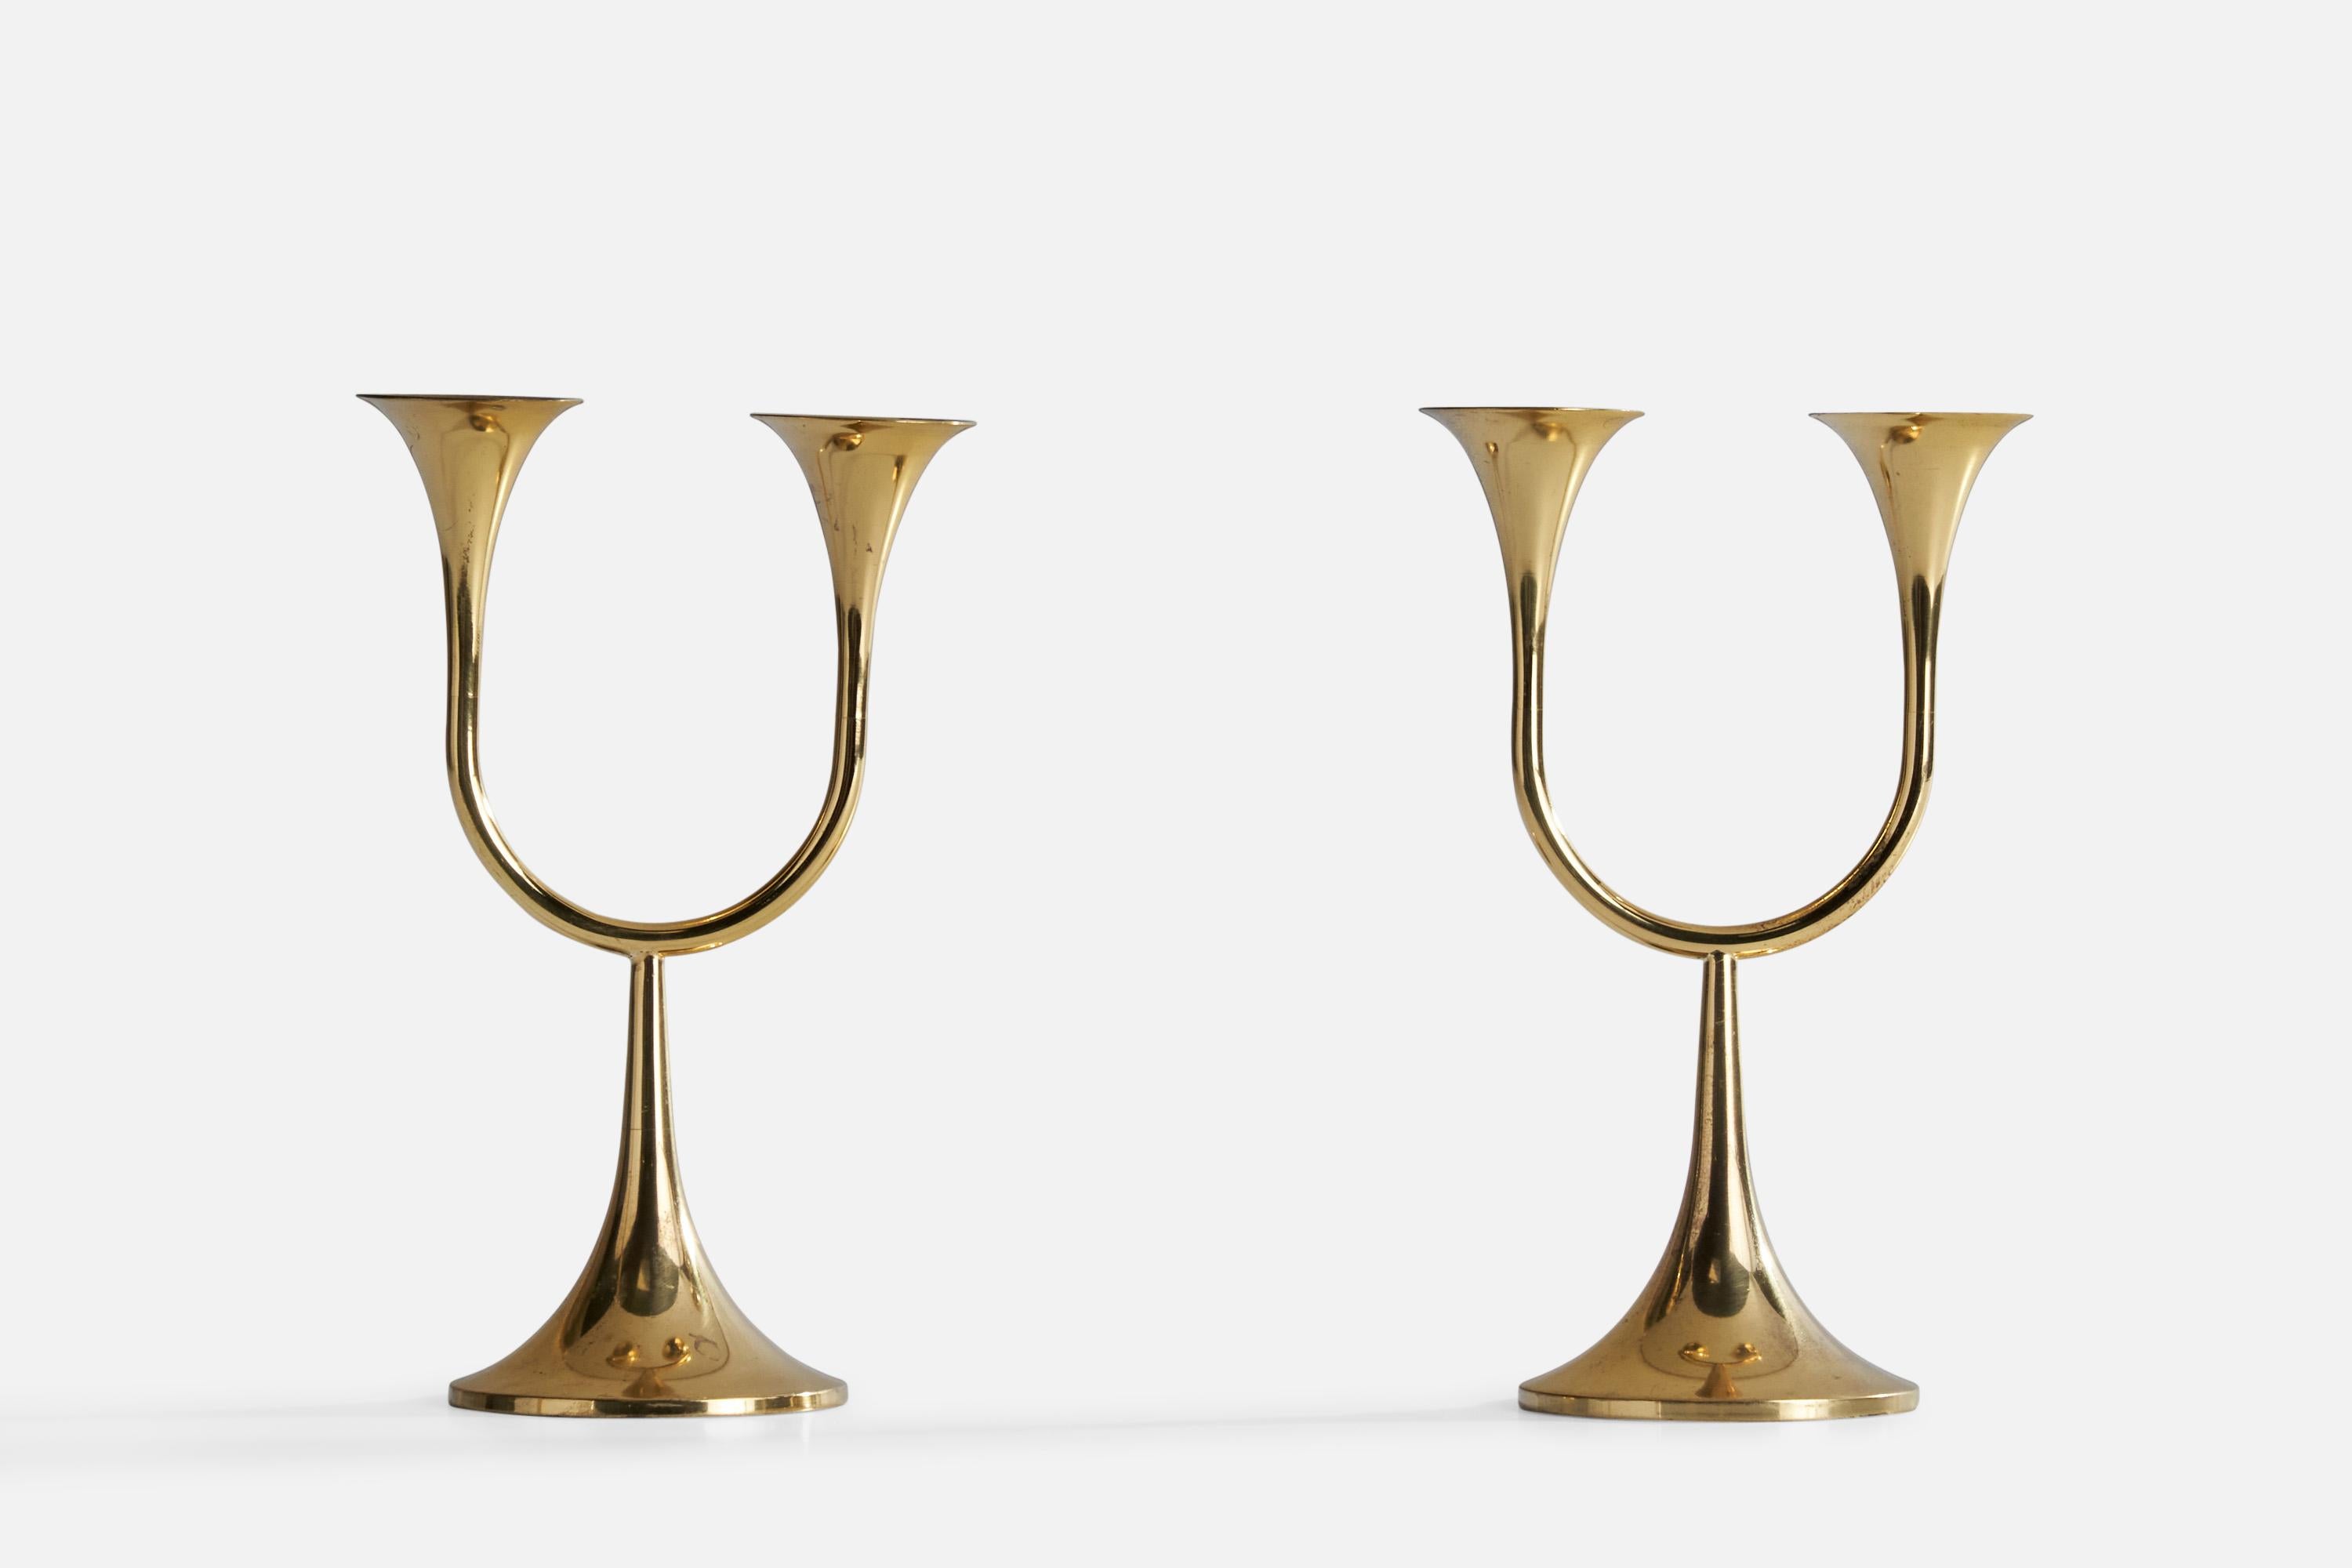 A pair of brass candlesticks designed and produced in Sweden, c. 1960s.

Holds .5” diameter candles.